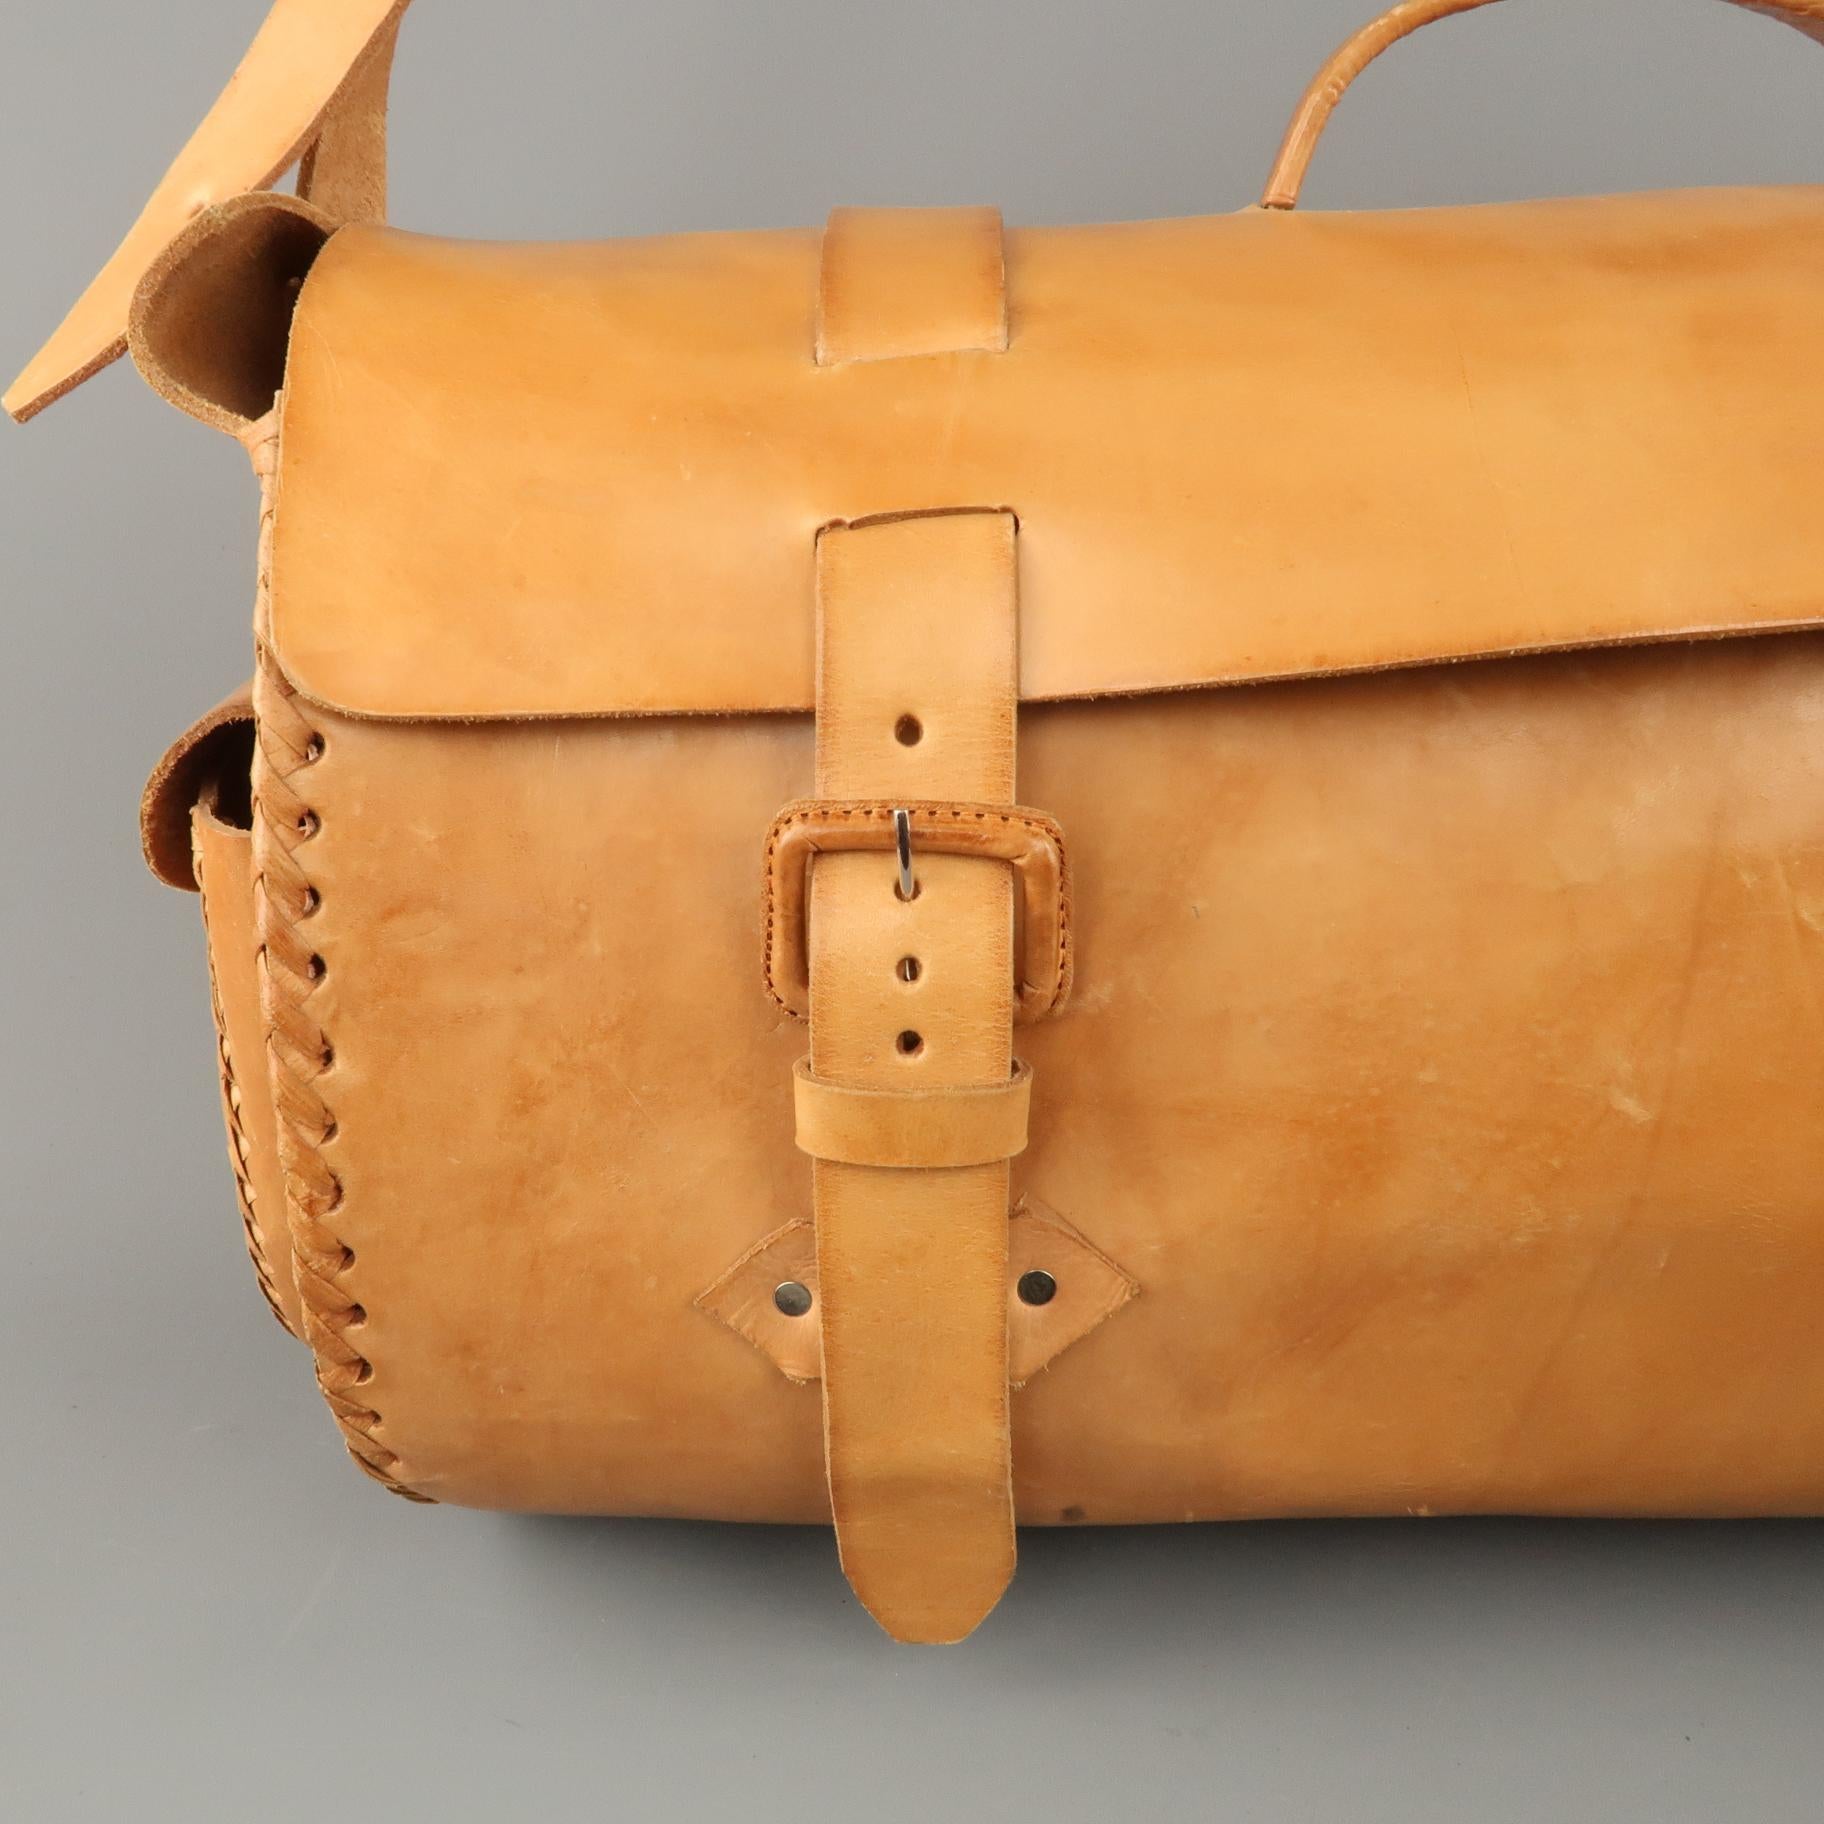 woven leather travel bags